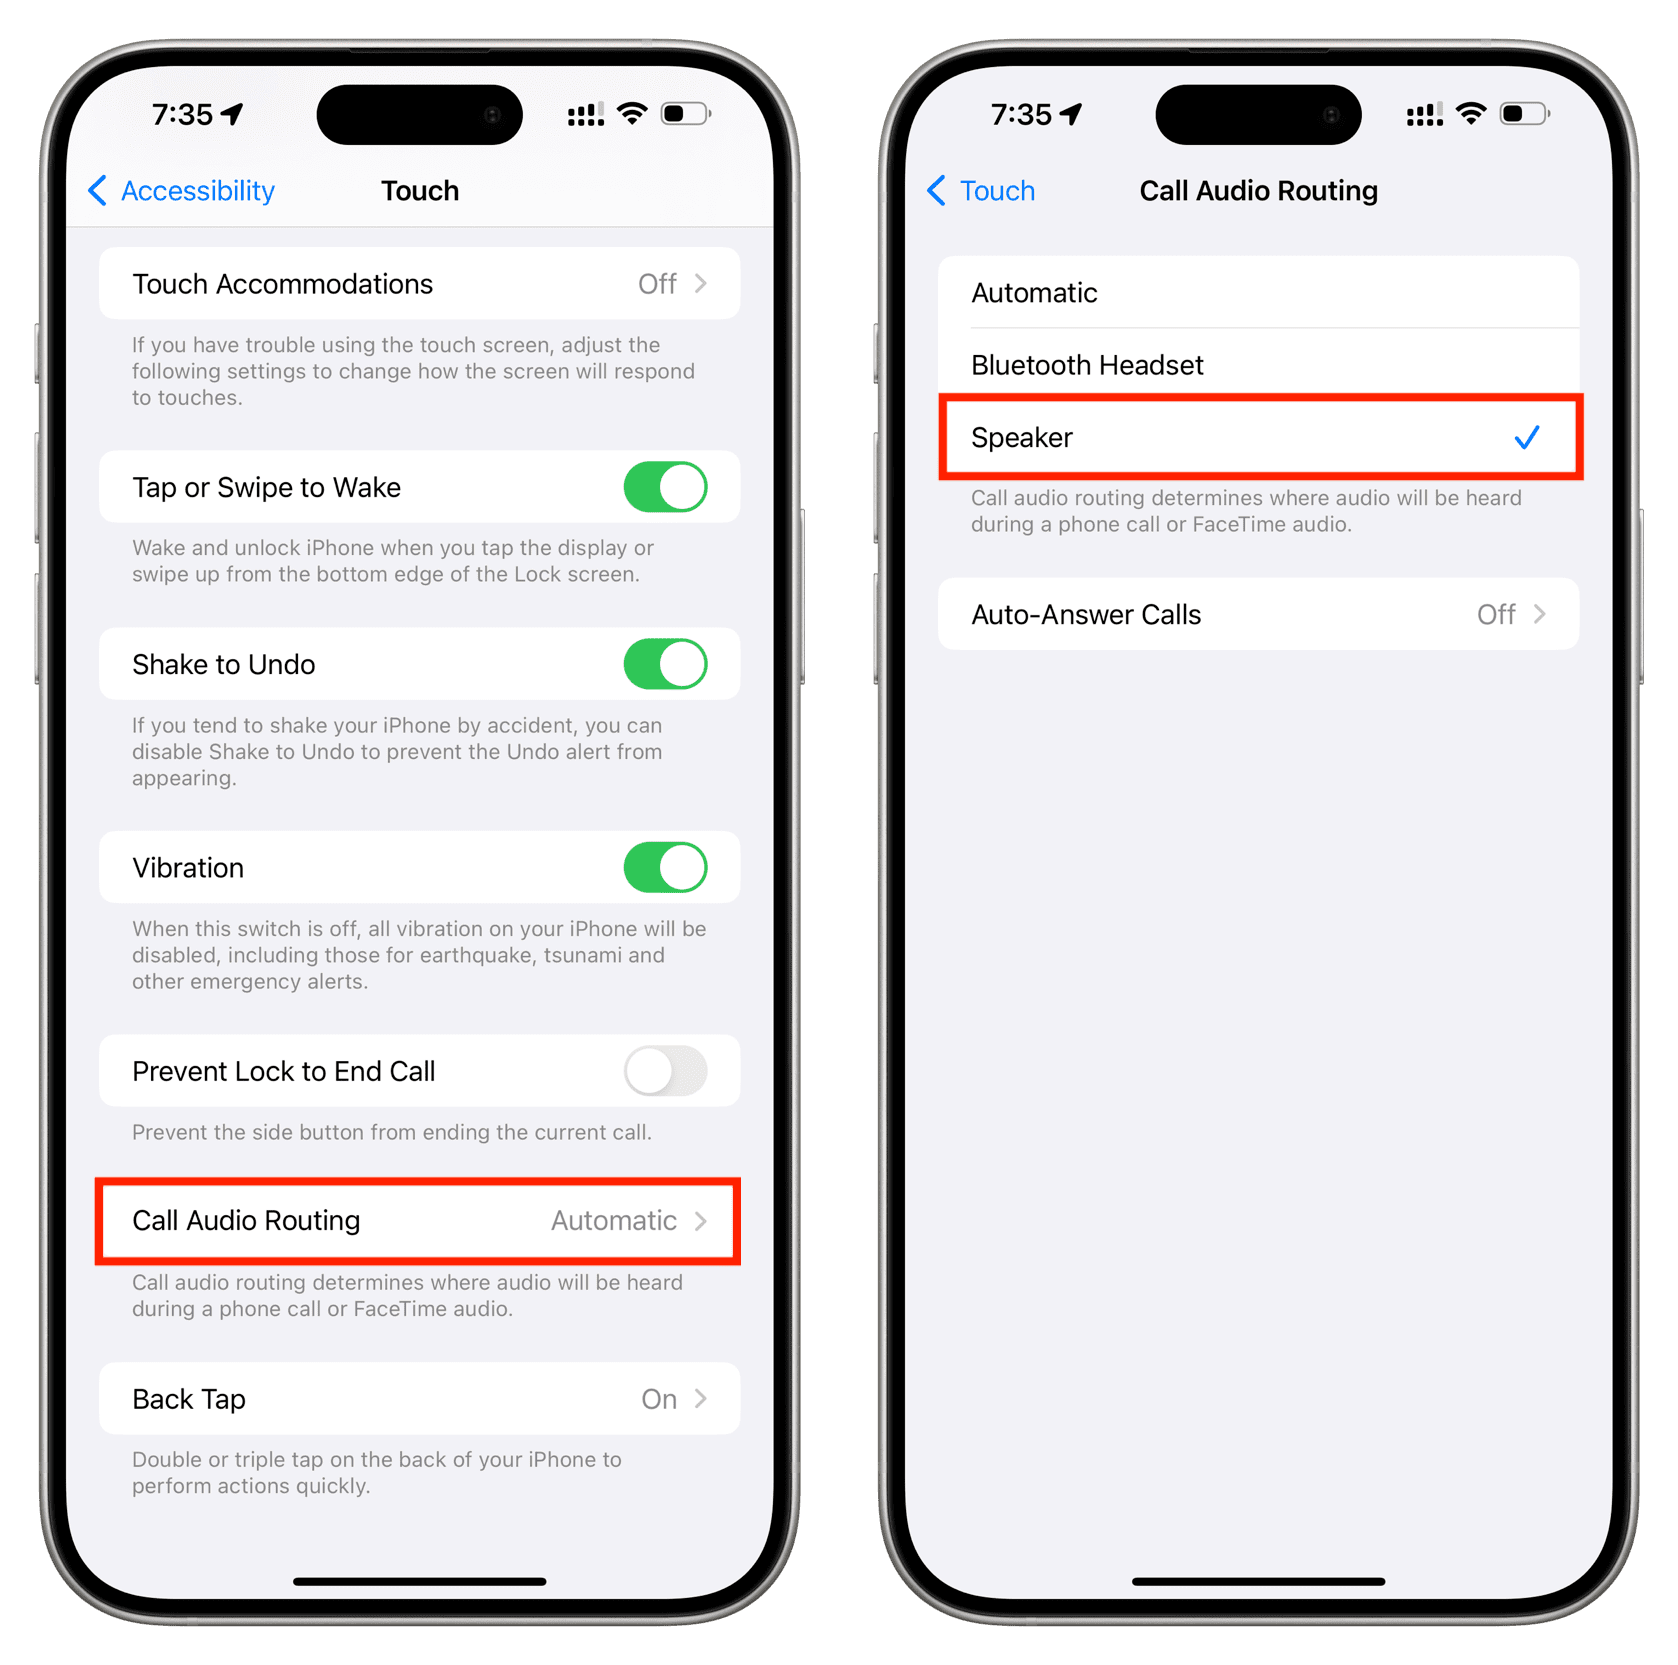 Set Call Audio Routing to Speaker on iPhone